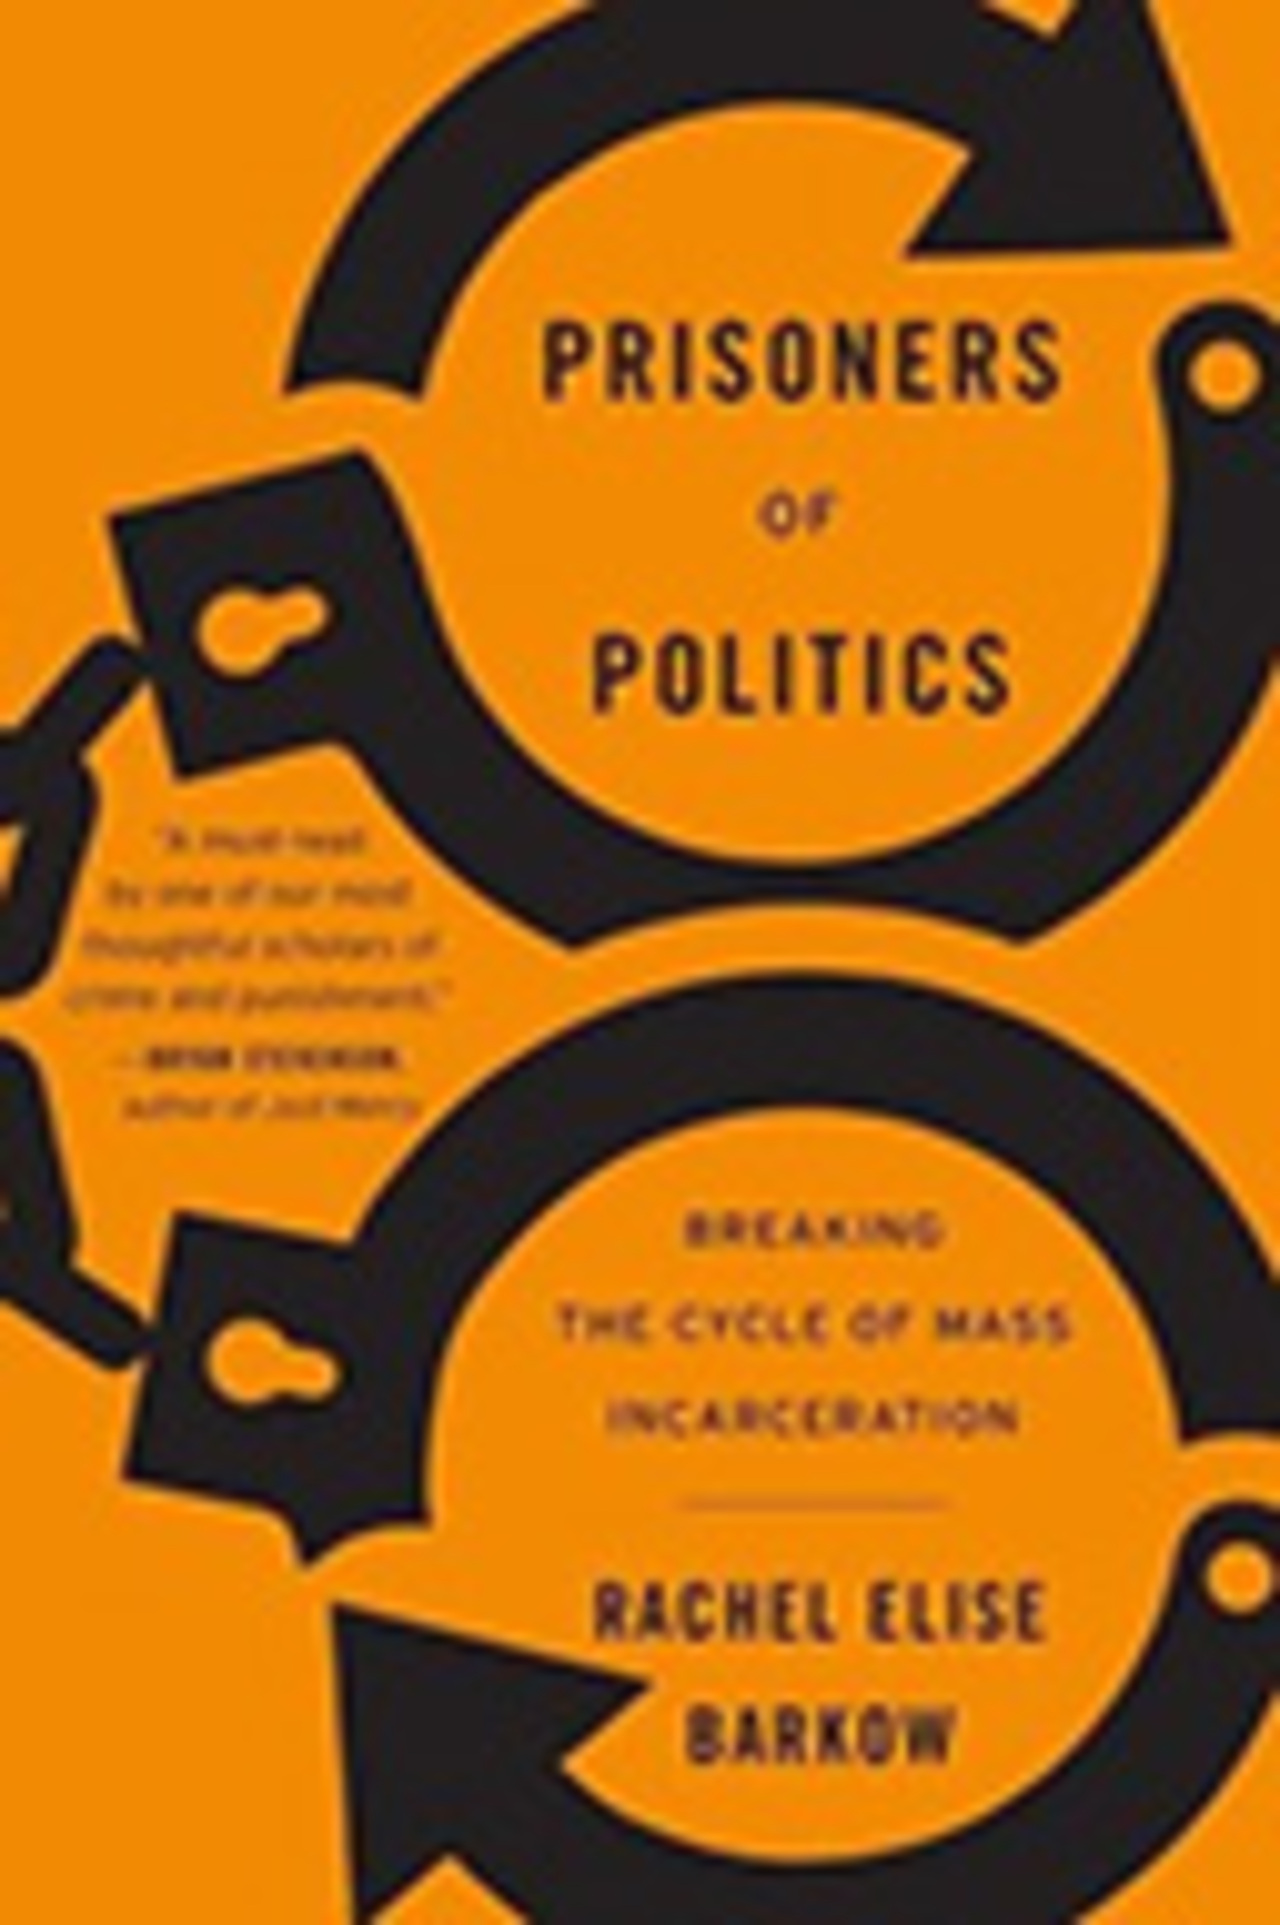 Prisoners Of Politics: Breaking The Cycle Of Mass Incarceration – (The Politics of Criminal Justice Reform)